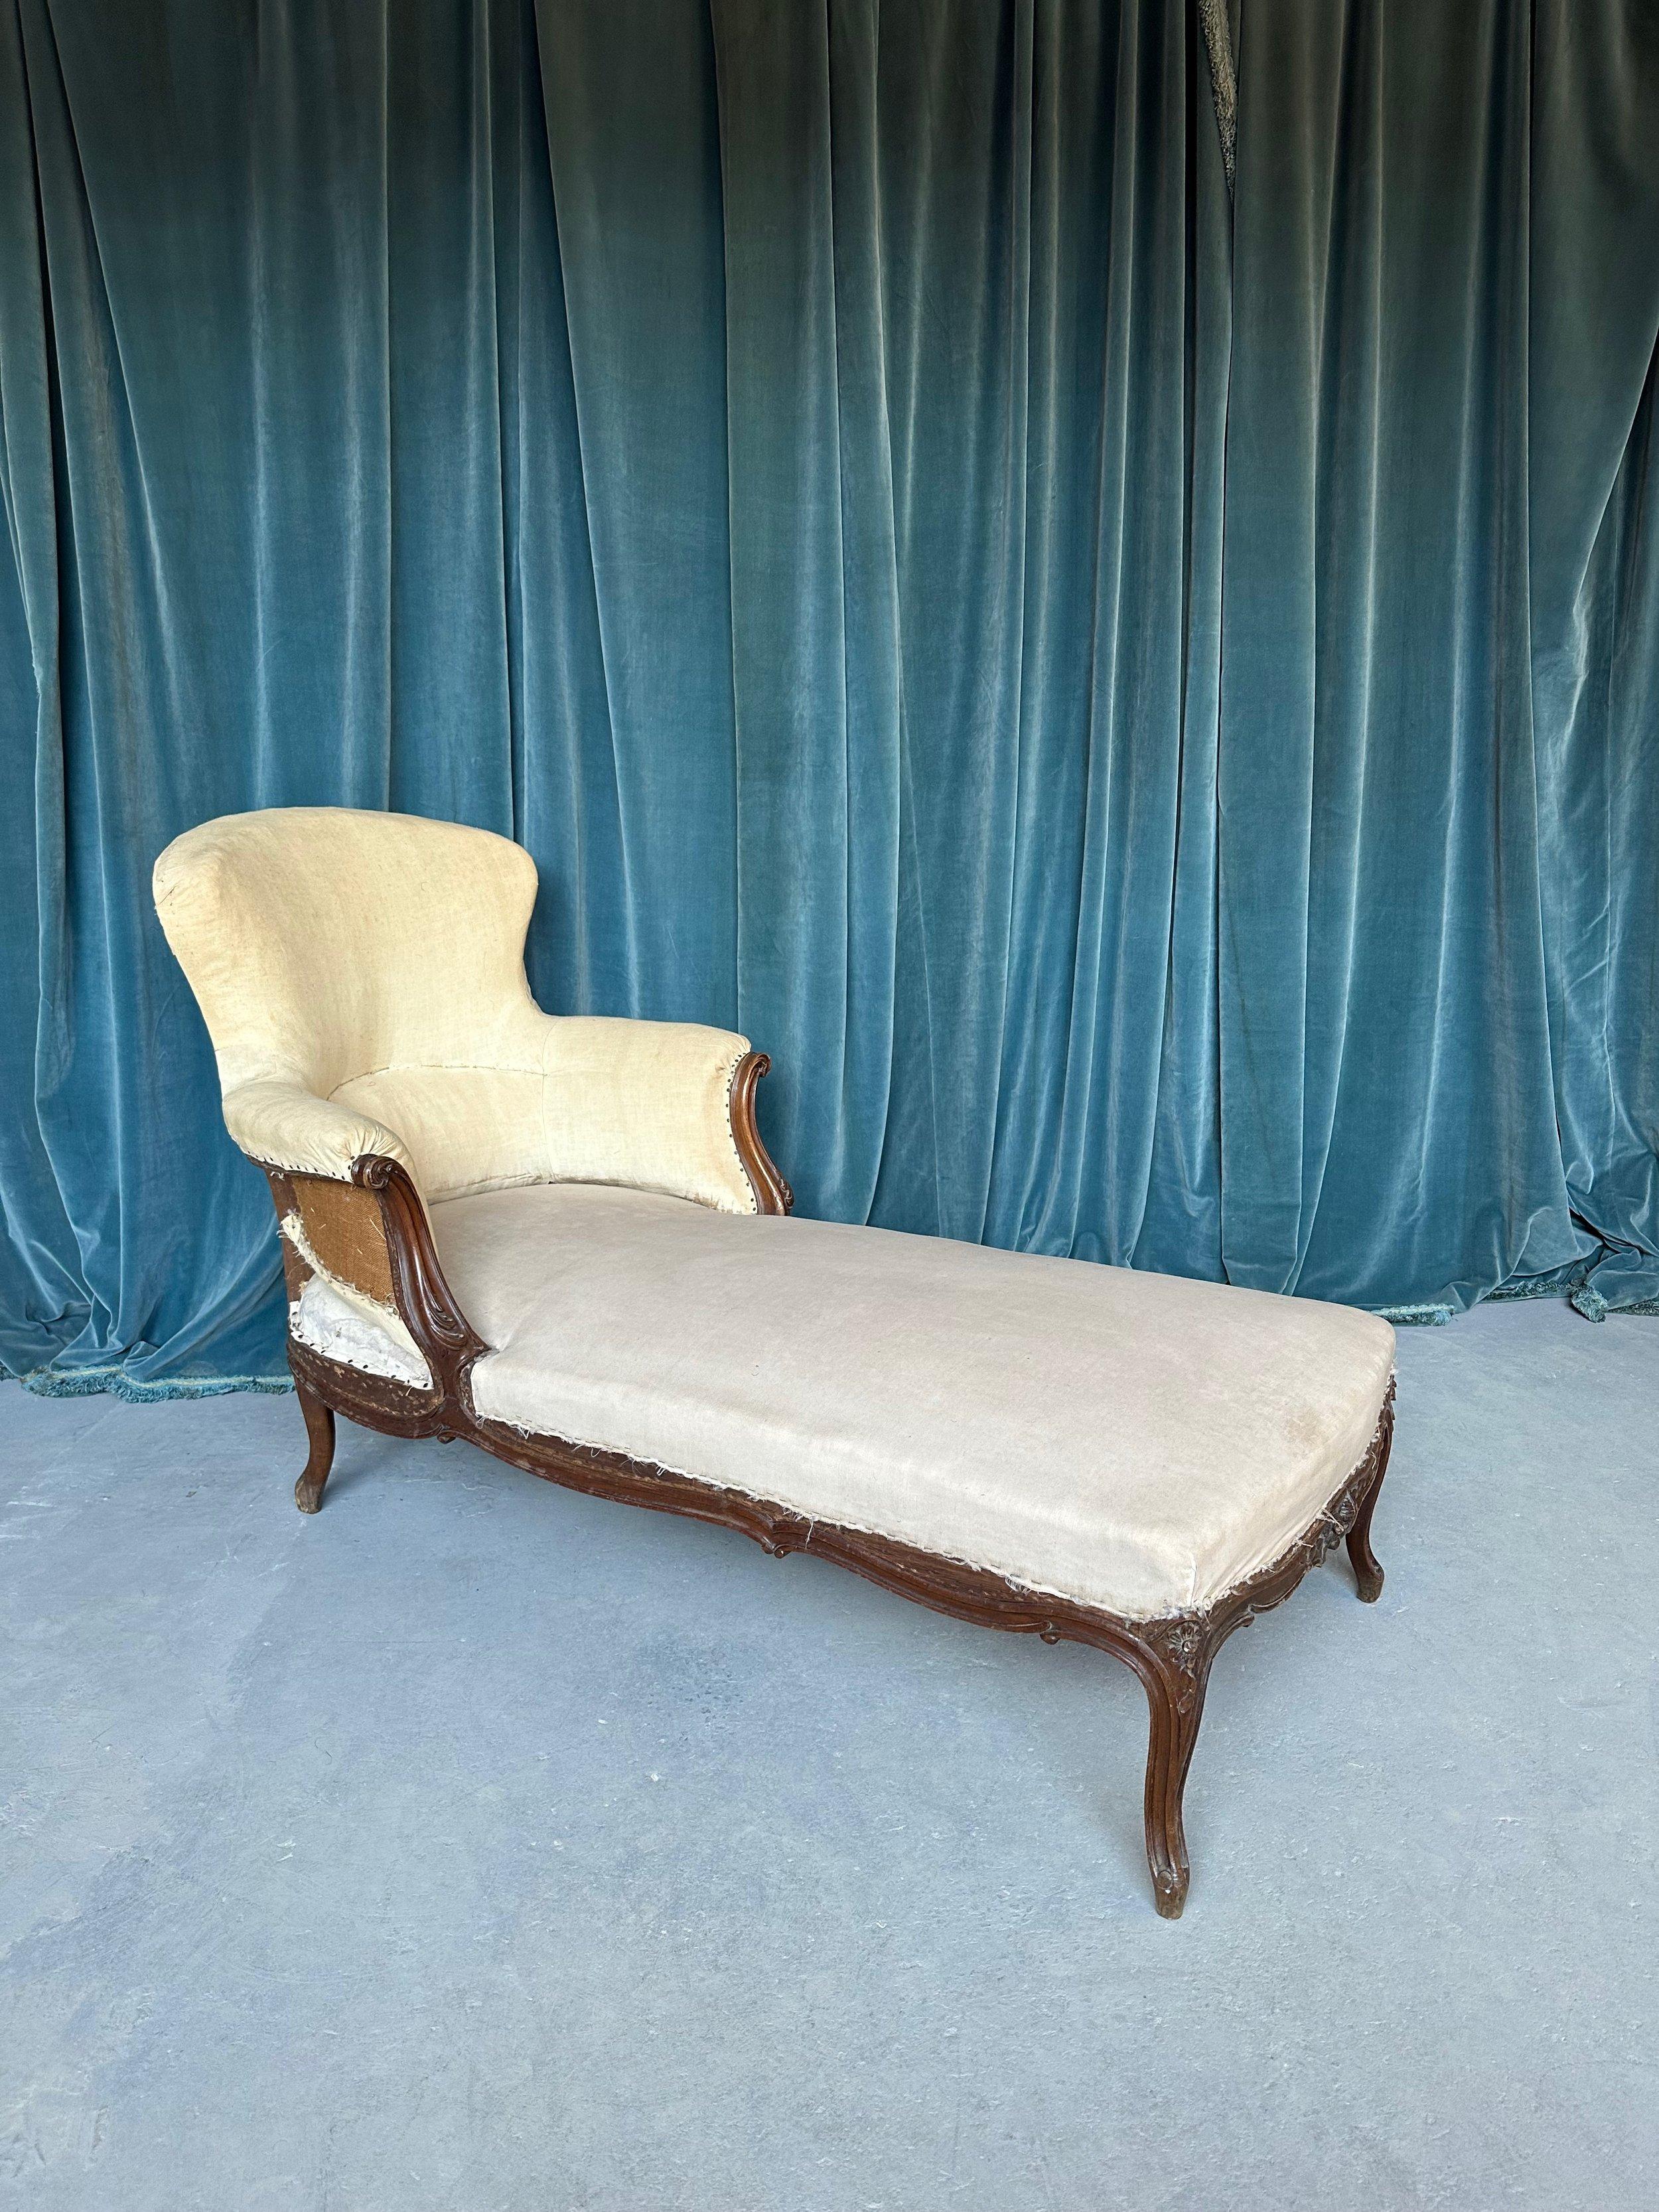 This elegant French Napoleon III chaise longue is classic and timeless. Inspired by the Louis XV period, this 19th century chaise features an elaborately carved fruitwood frame that will make a stunning addition to your salon or even your private